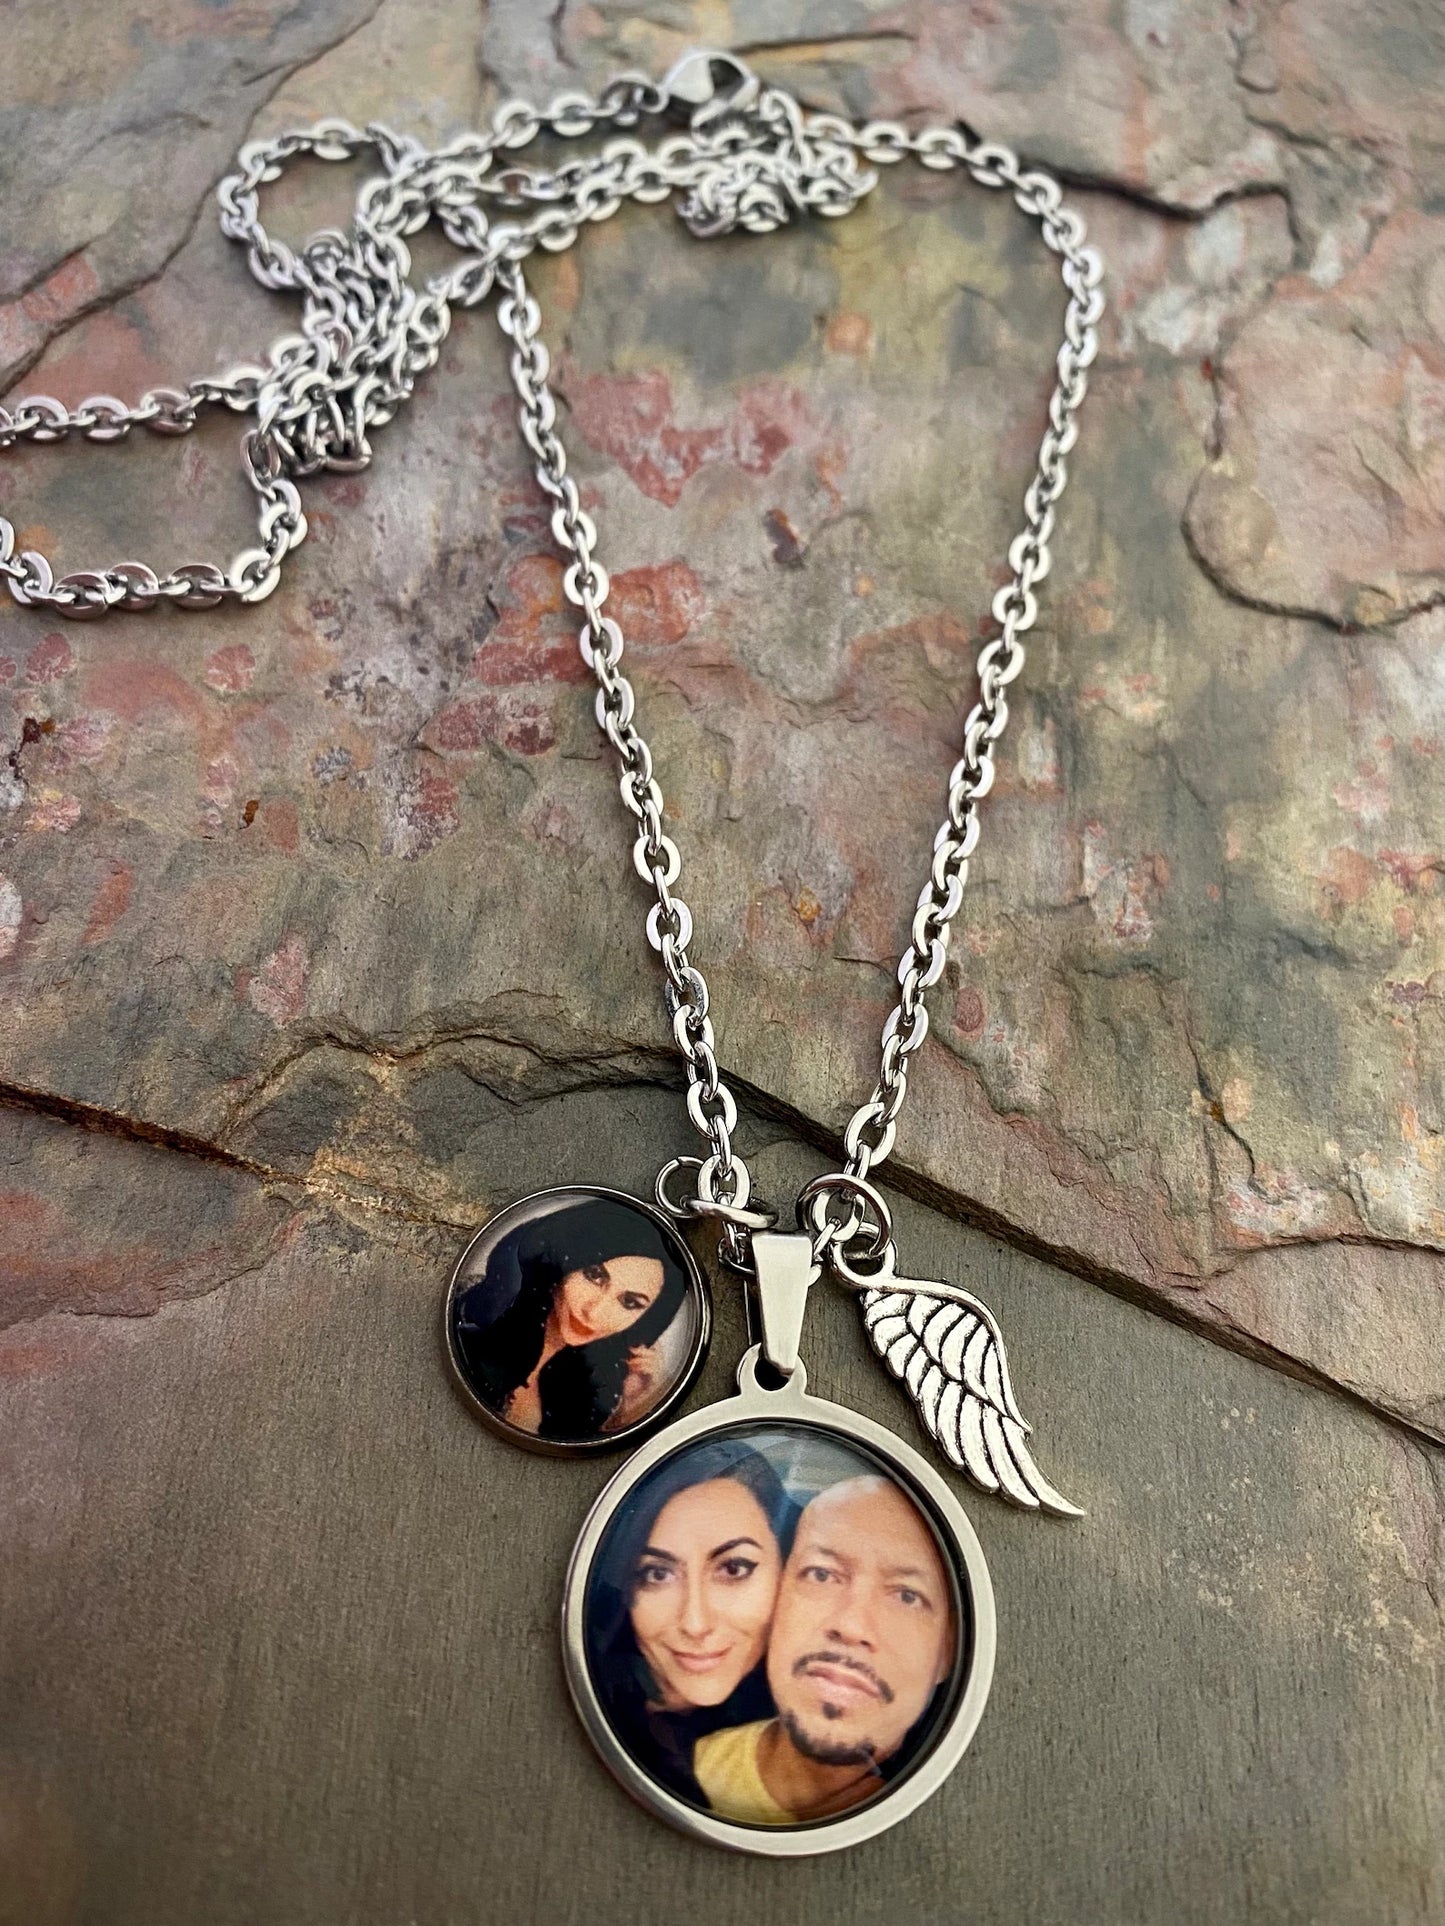 Memory Photo Necklace- I will hold you in my heart until I hold you in heaven